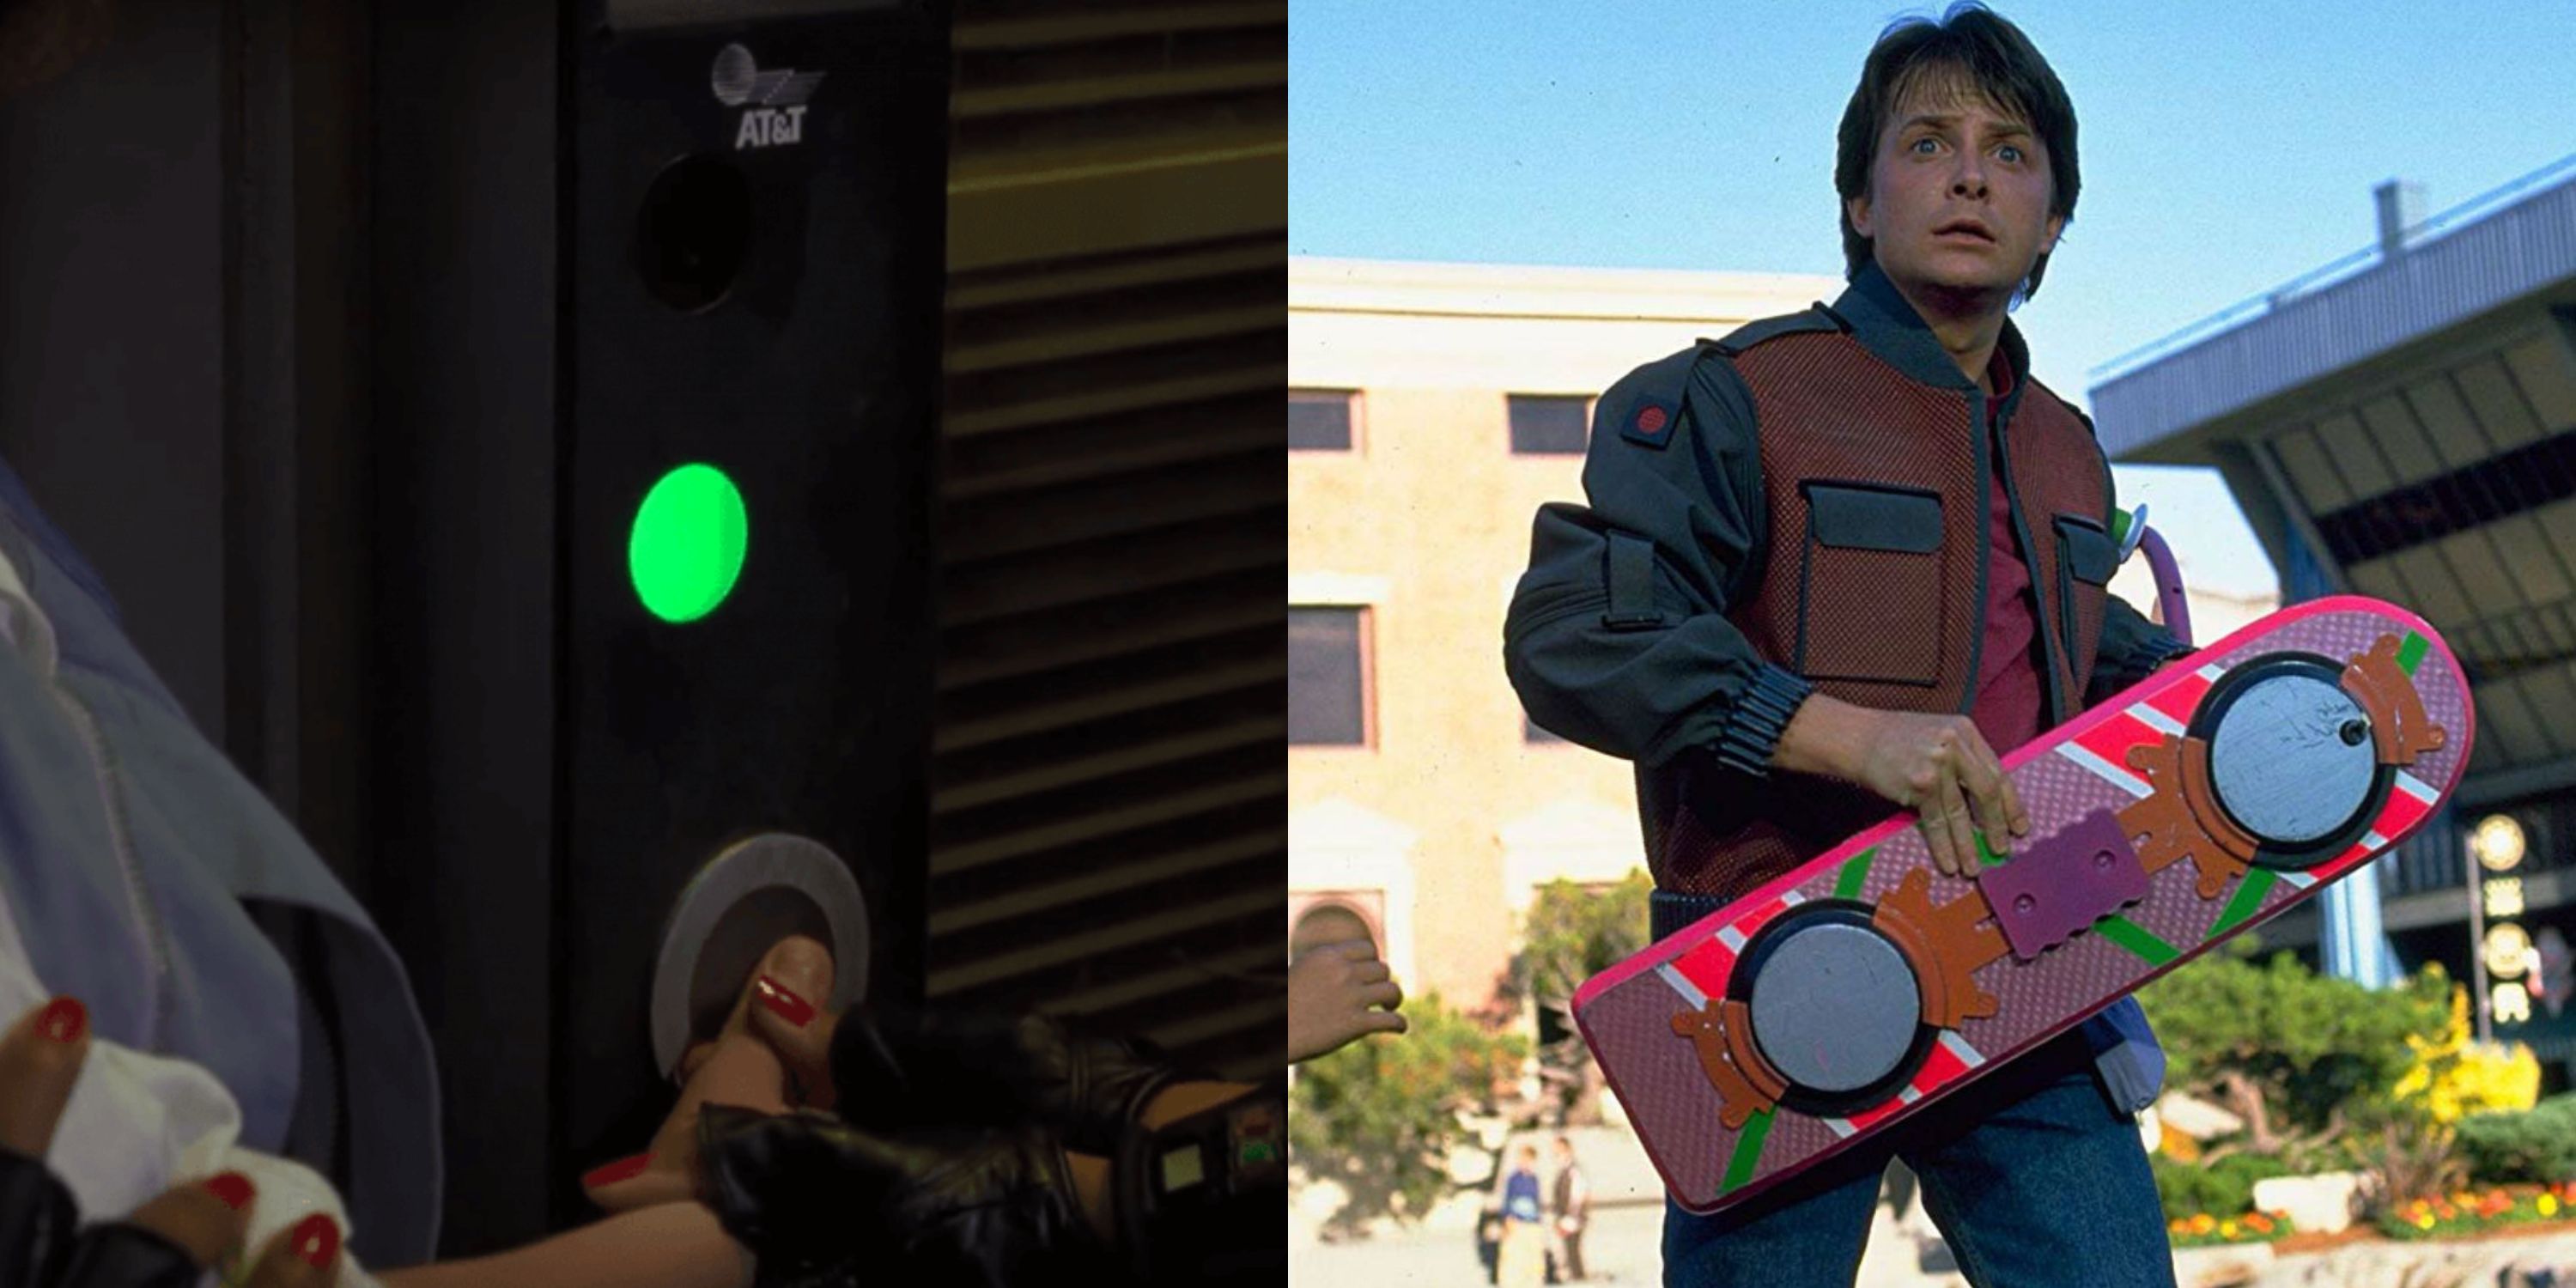 Best Back to the Future gadgets and memorabilia you're ever likely to see